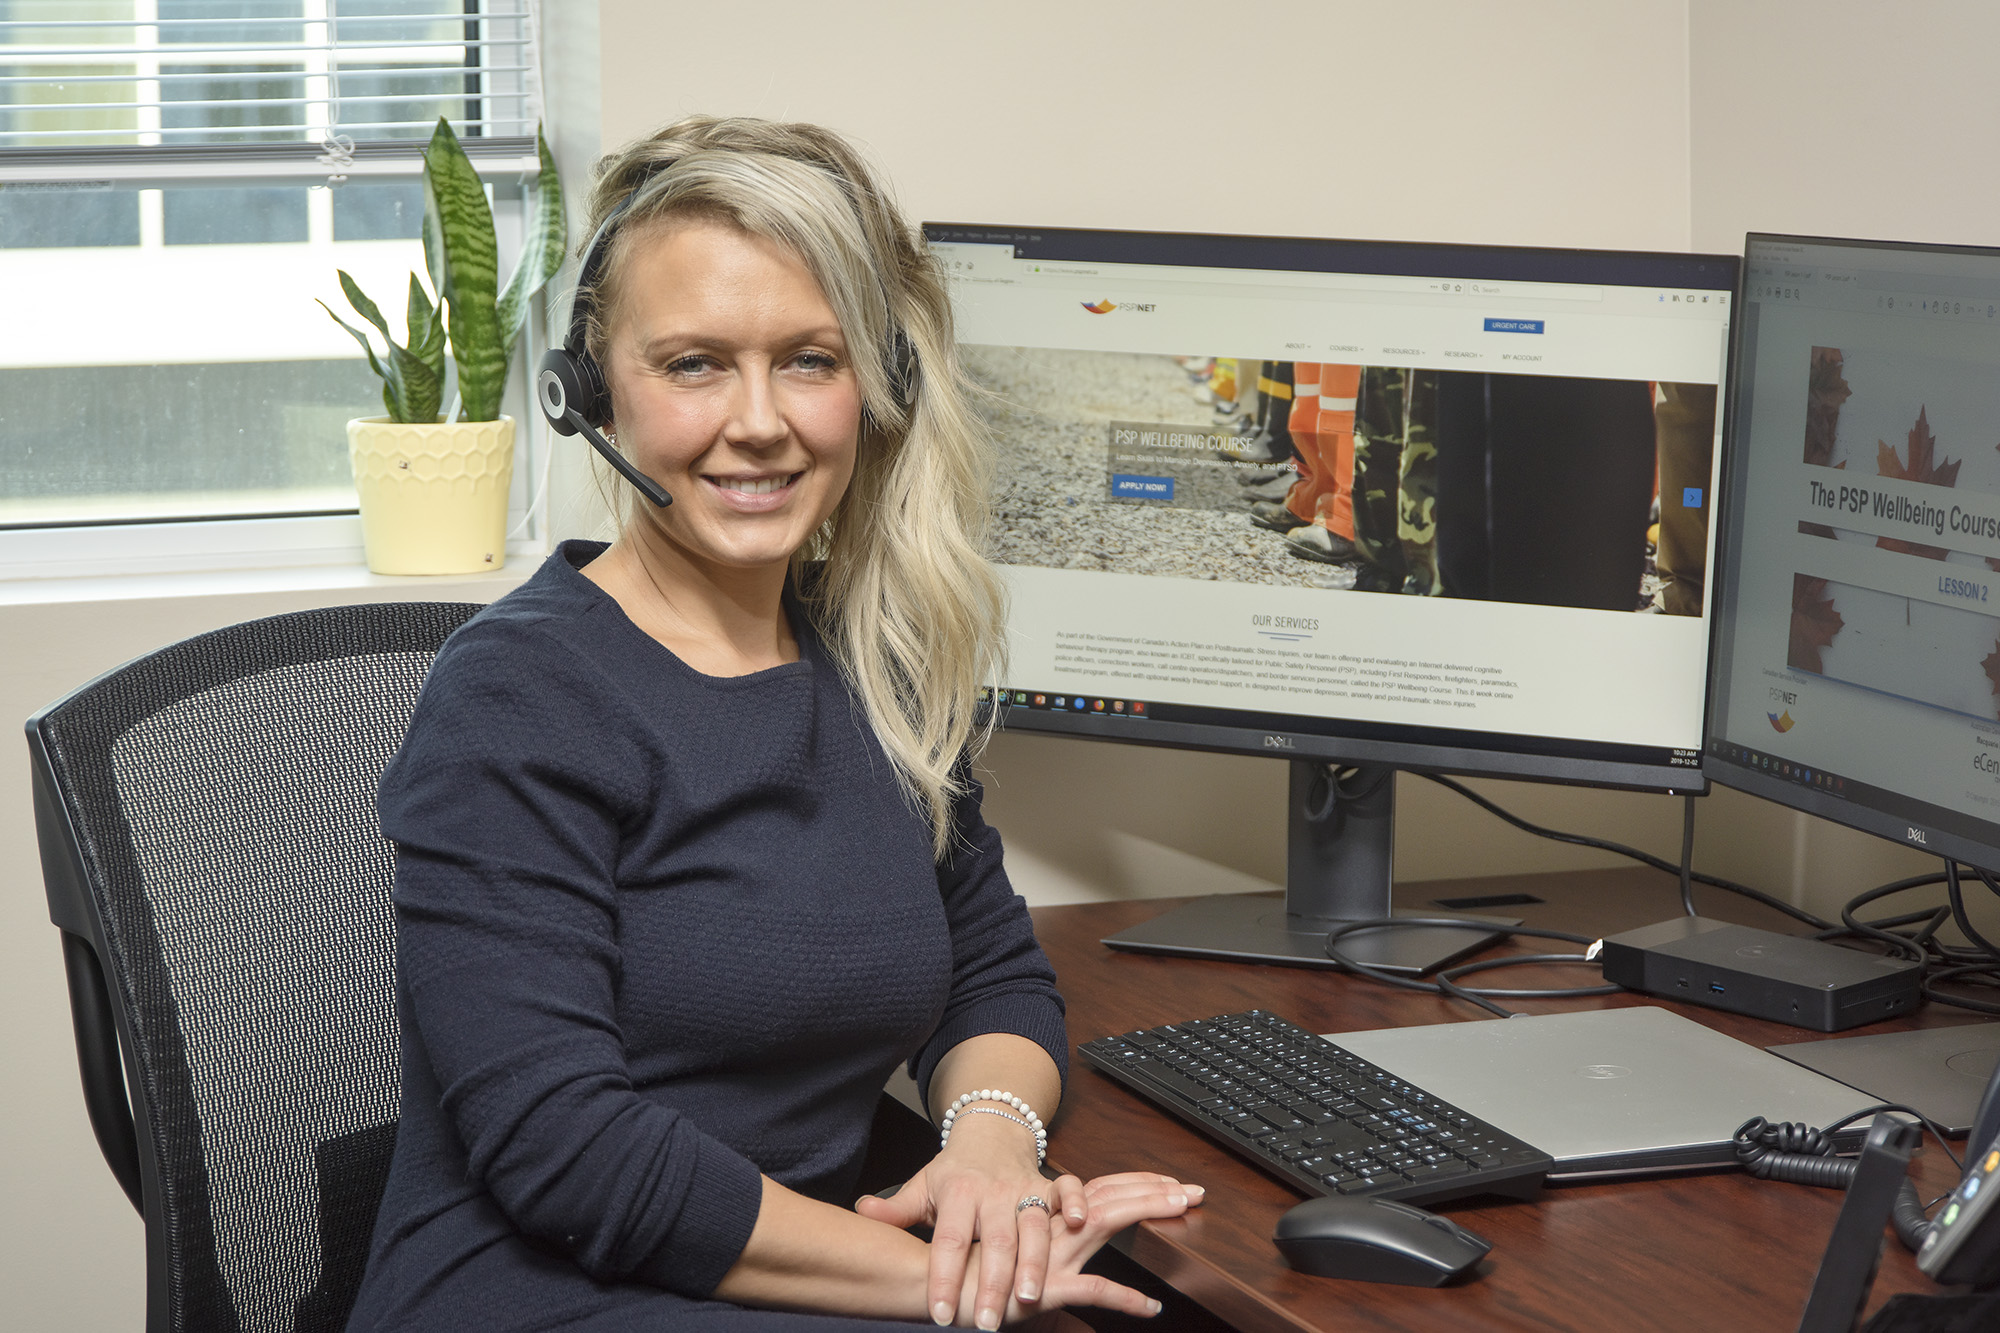 With years of experience offering therapy to first responders and their families, registered doctoral psychologist Dr. Jody Burnett also provides support to public safety personnel using PSPNET. (Photo by Trevor Hopkin)